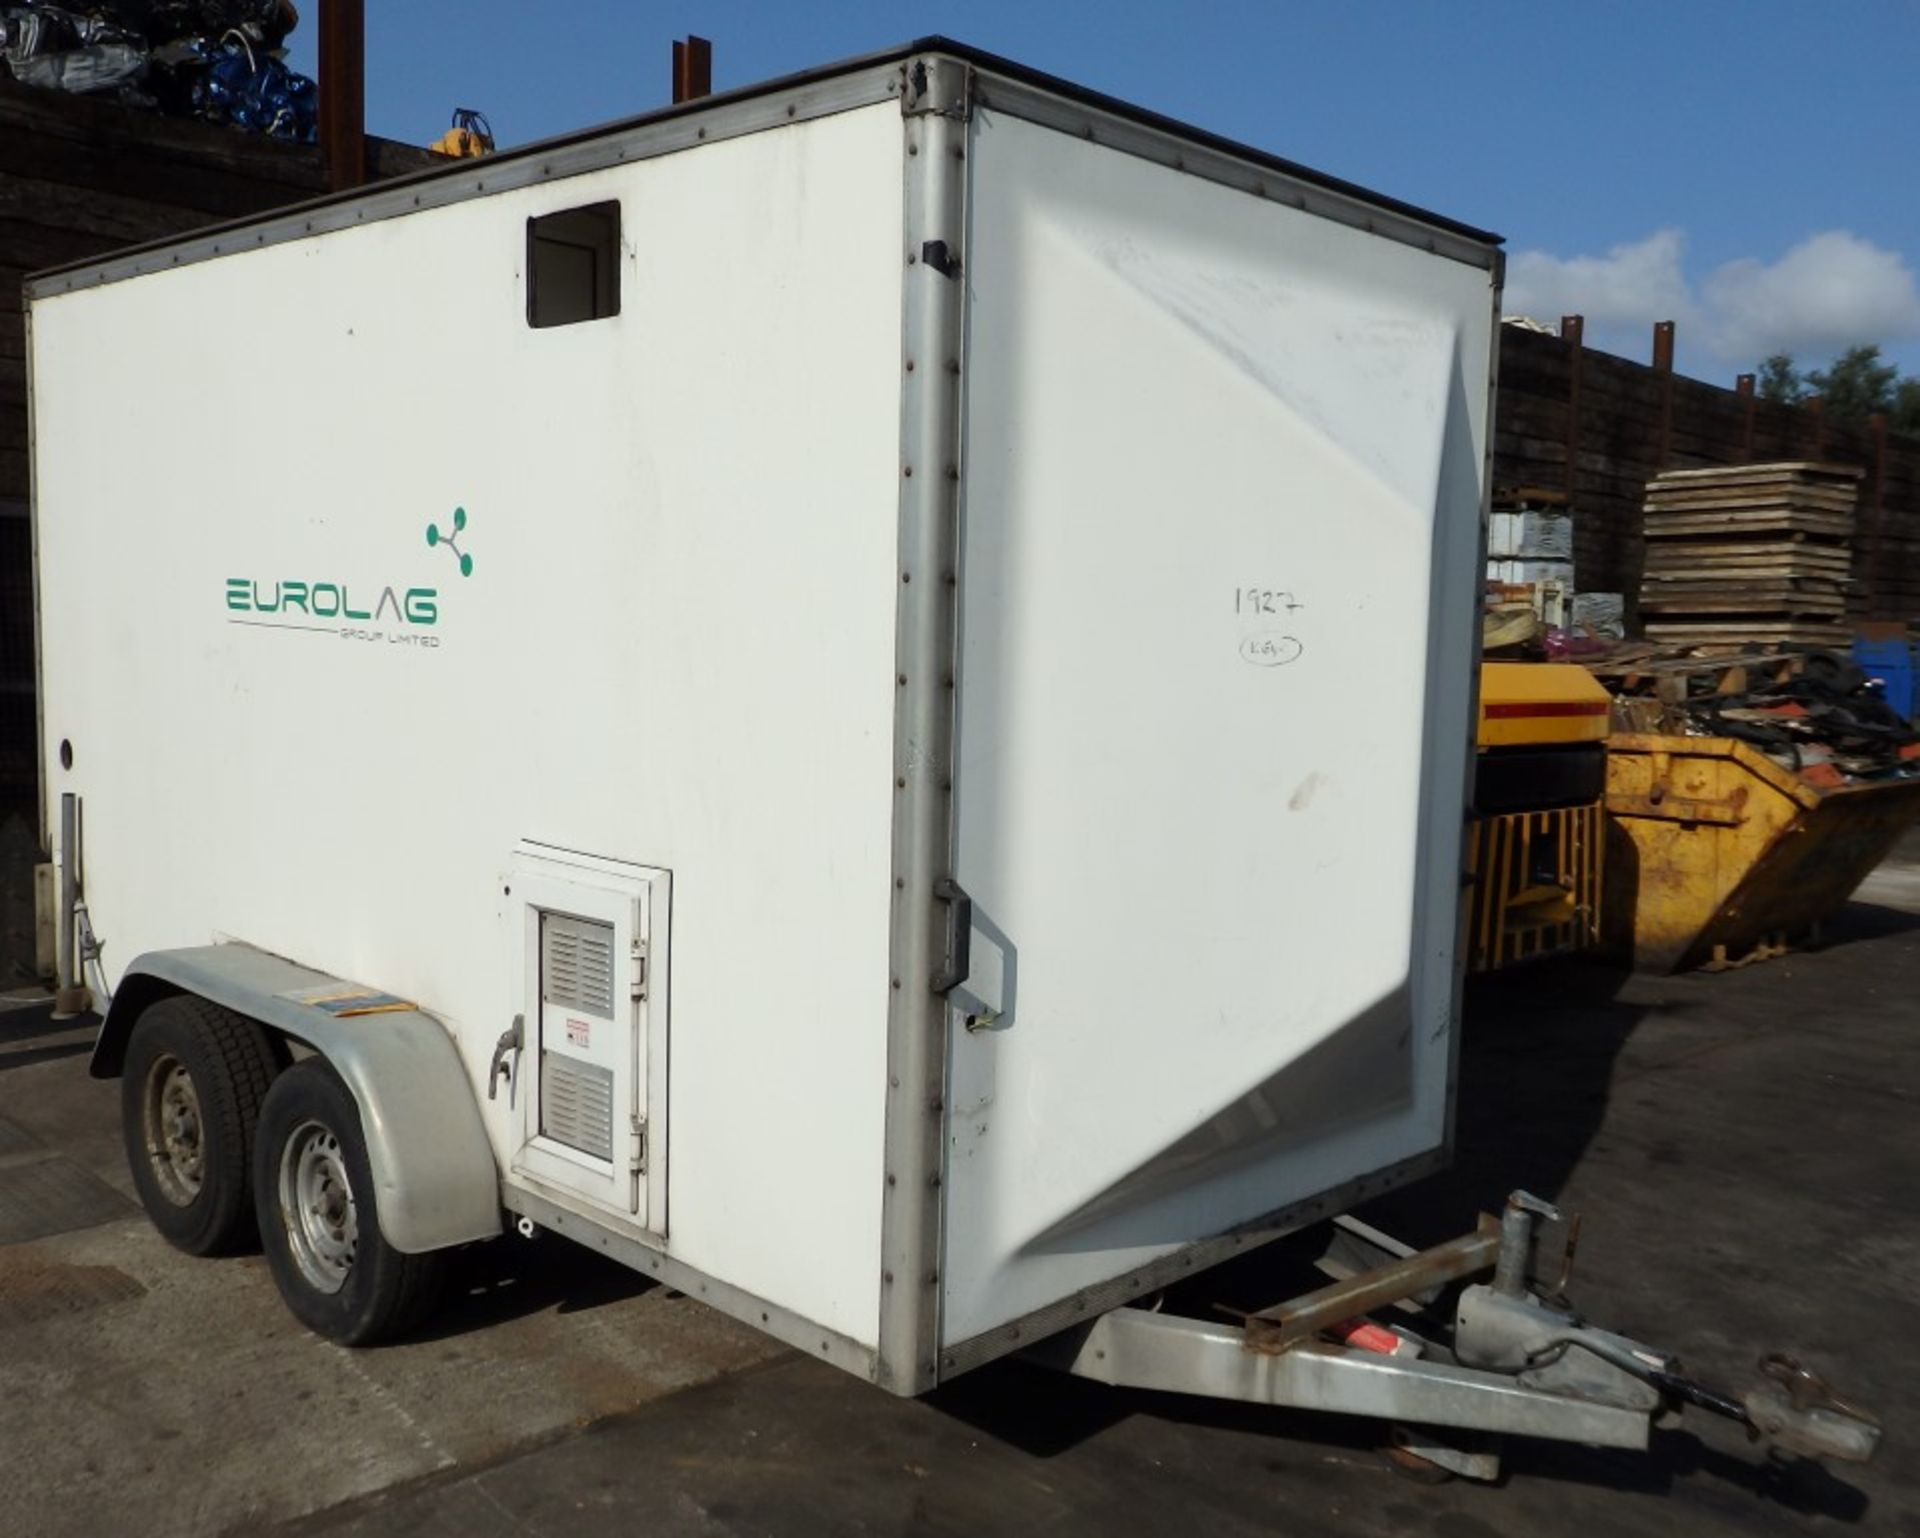 1 x Eurolag Towing Trailer With In and Out Shower Facility - Previously Used As Decontamination Wash